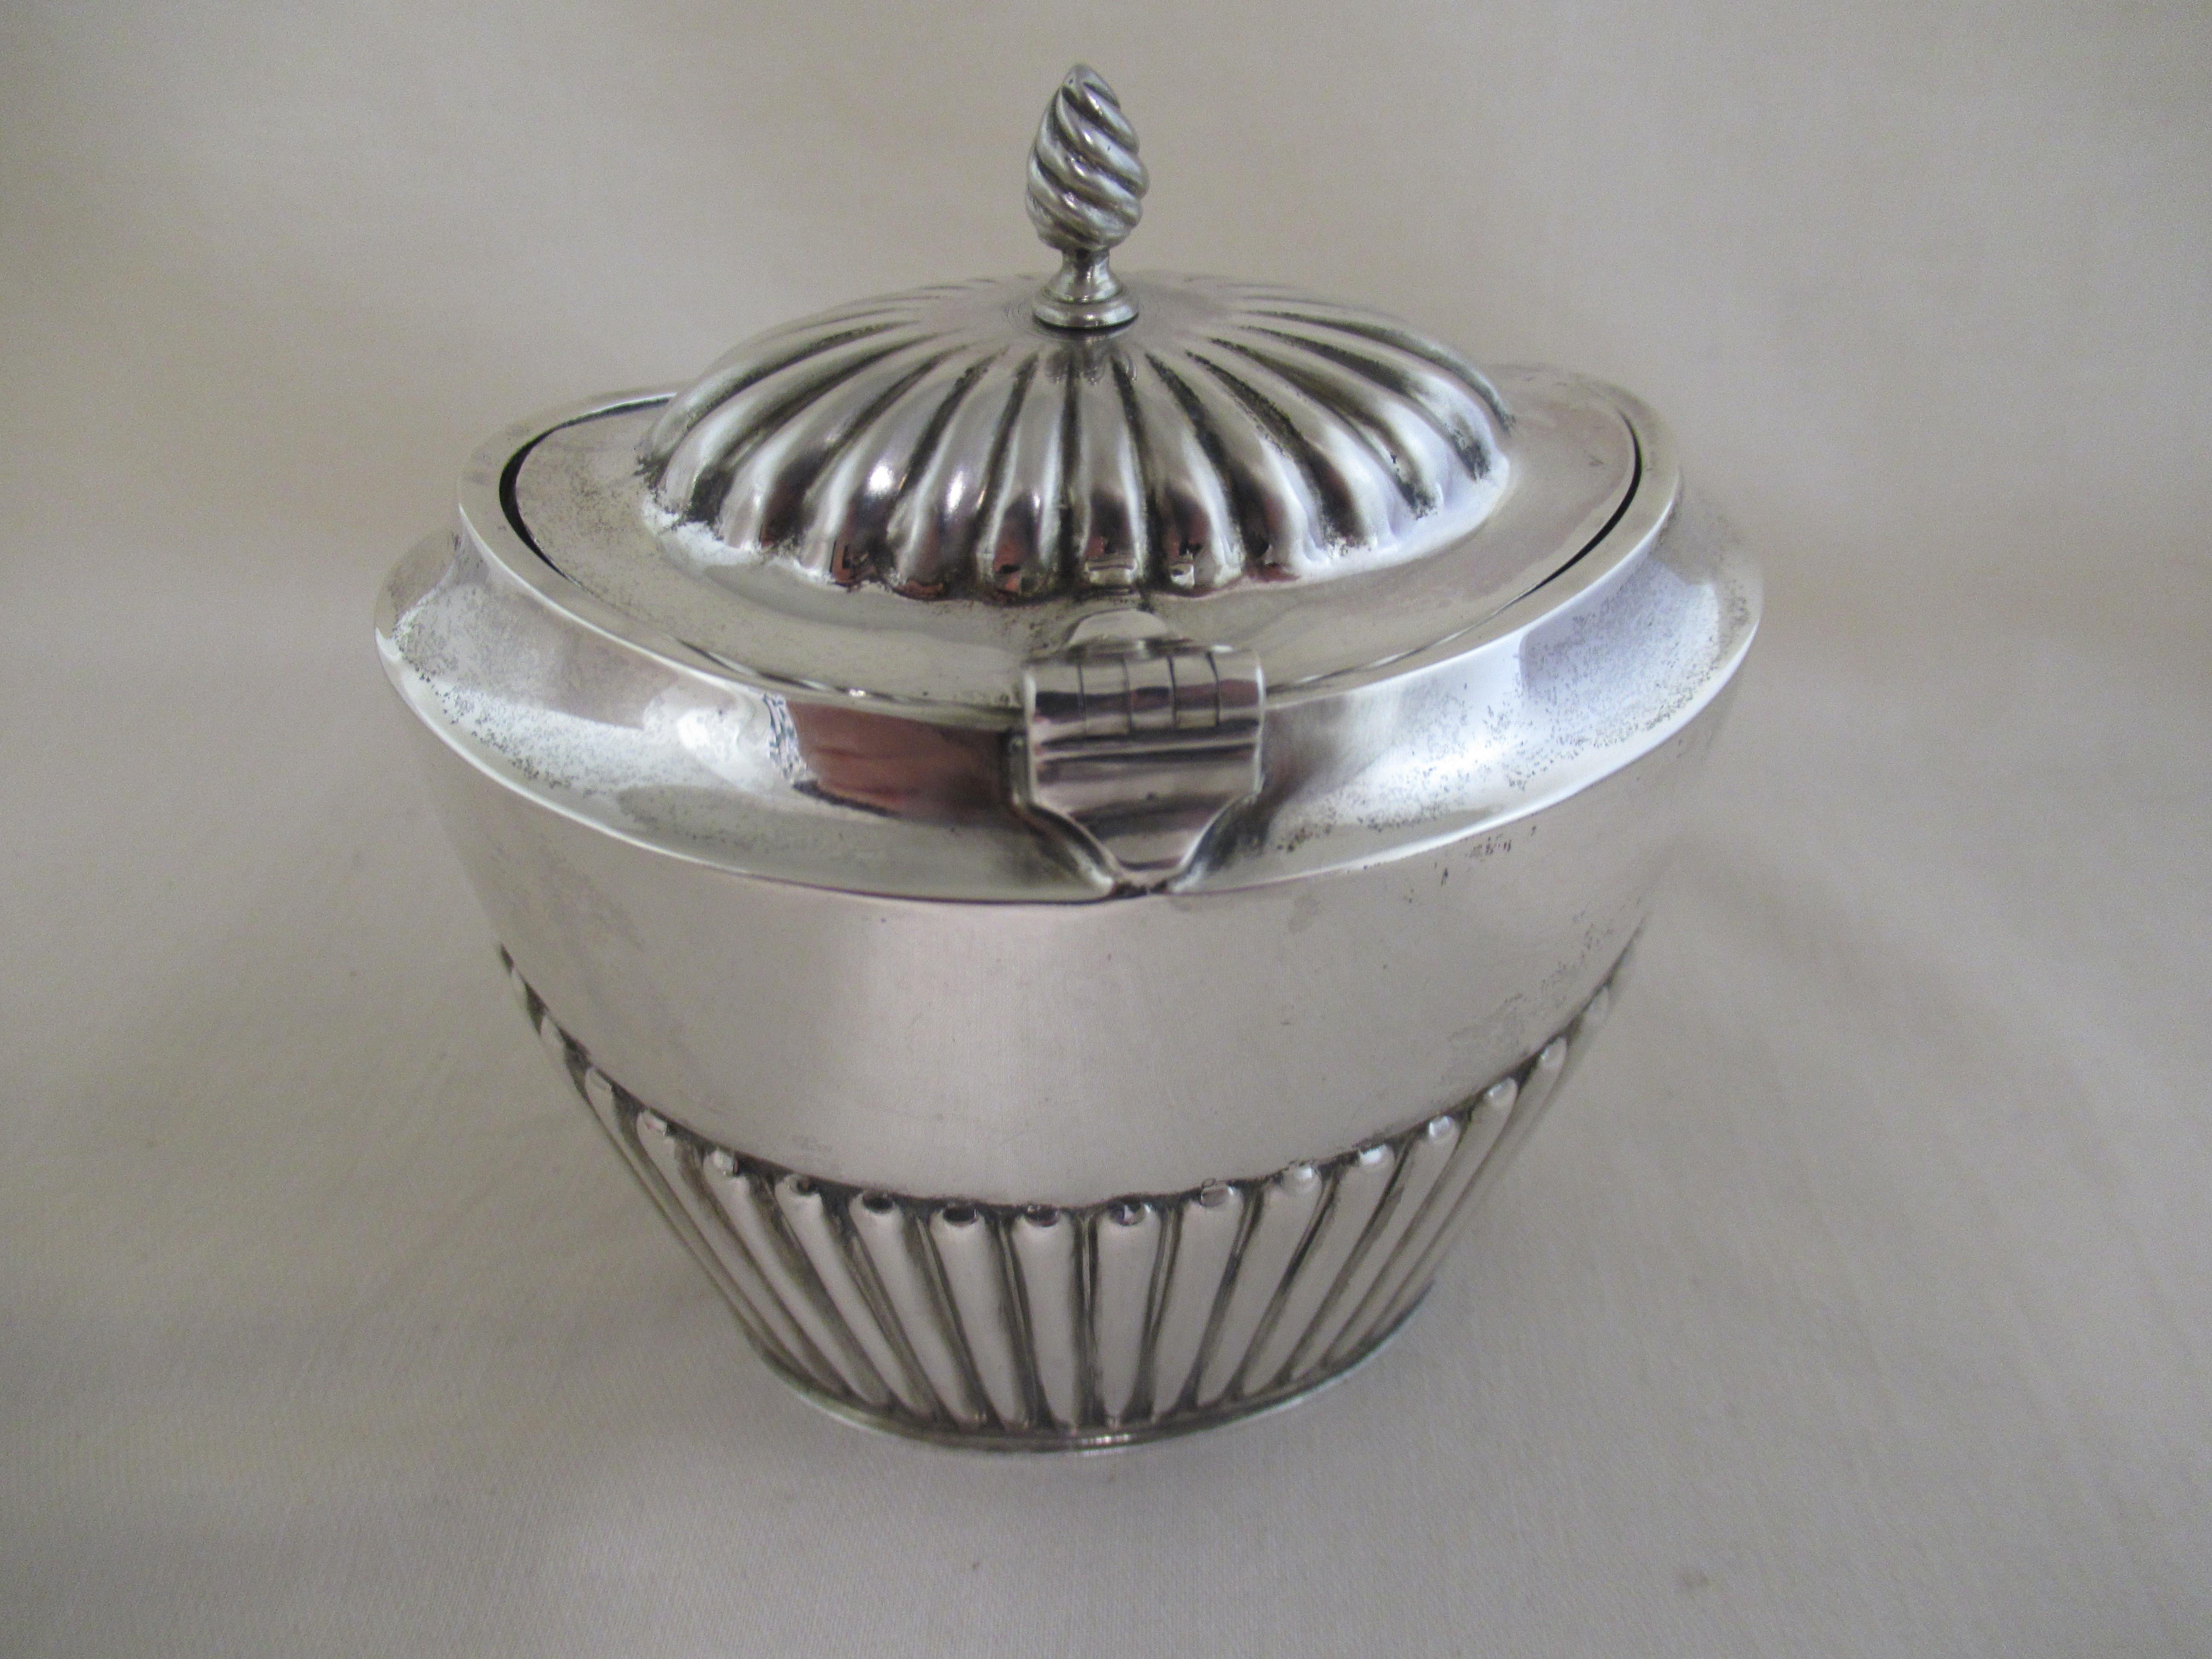 Sterling Silver - Oval Tea Caddy 
Made in 1909, ( 114 years old), by Barker Brothers, Constitution Hill. Birmingham.
 
A full set of hallmarks applied by the Chester Assay Office:- 
 Sword + Sheaves of Corn - Chester Assay Office mark.
 Lion -